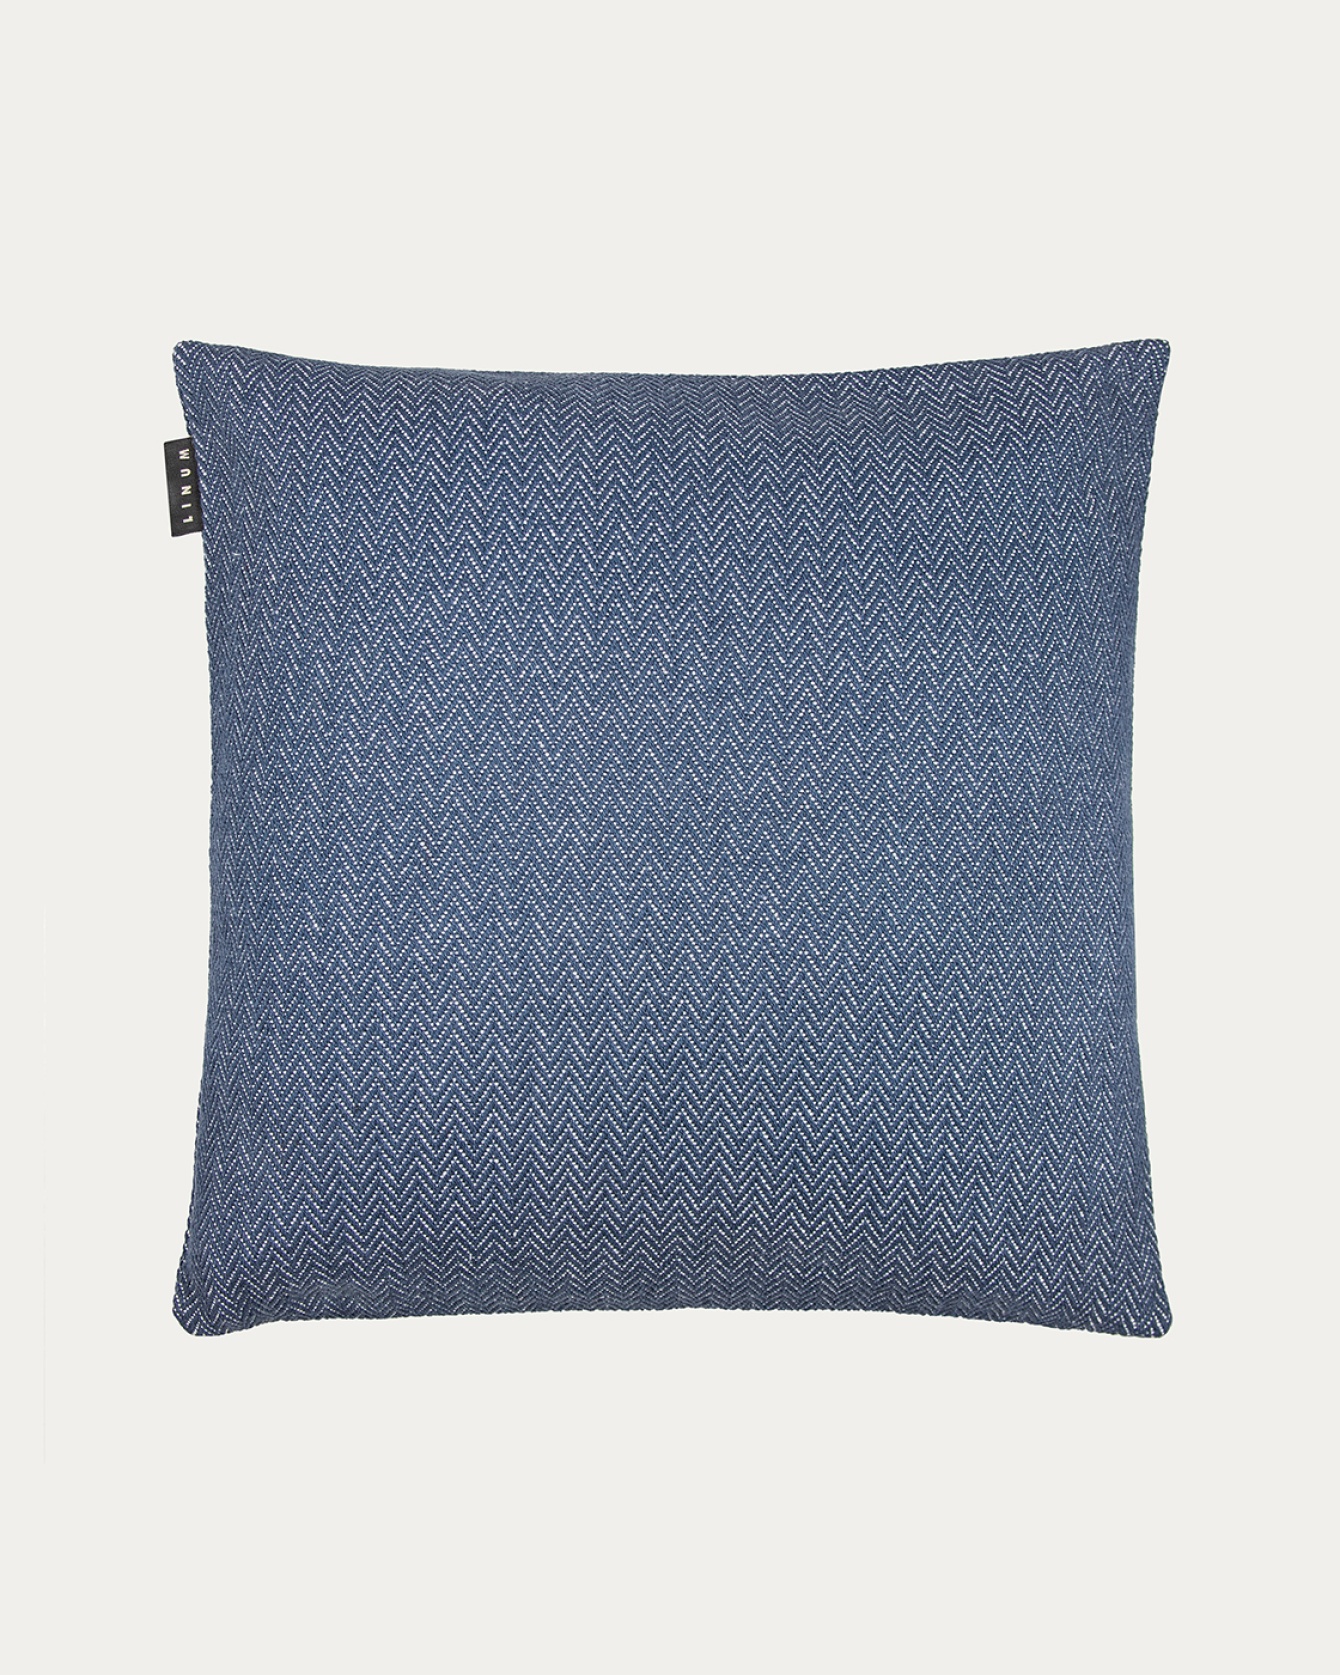 Product image ink blue SHEPARD cushion cover made of soft cotton with a discreet herringbone pattern from LINUM DESIGN. Size 50x50 cm.